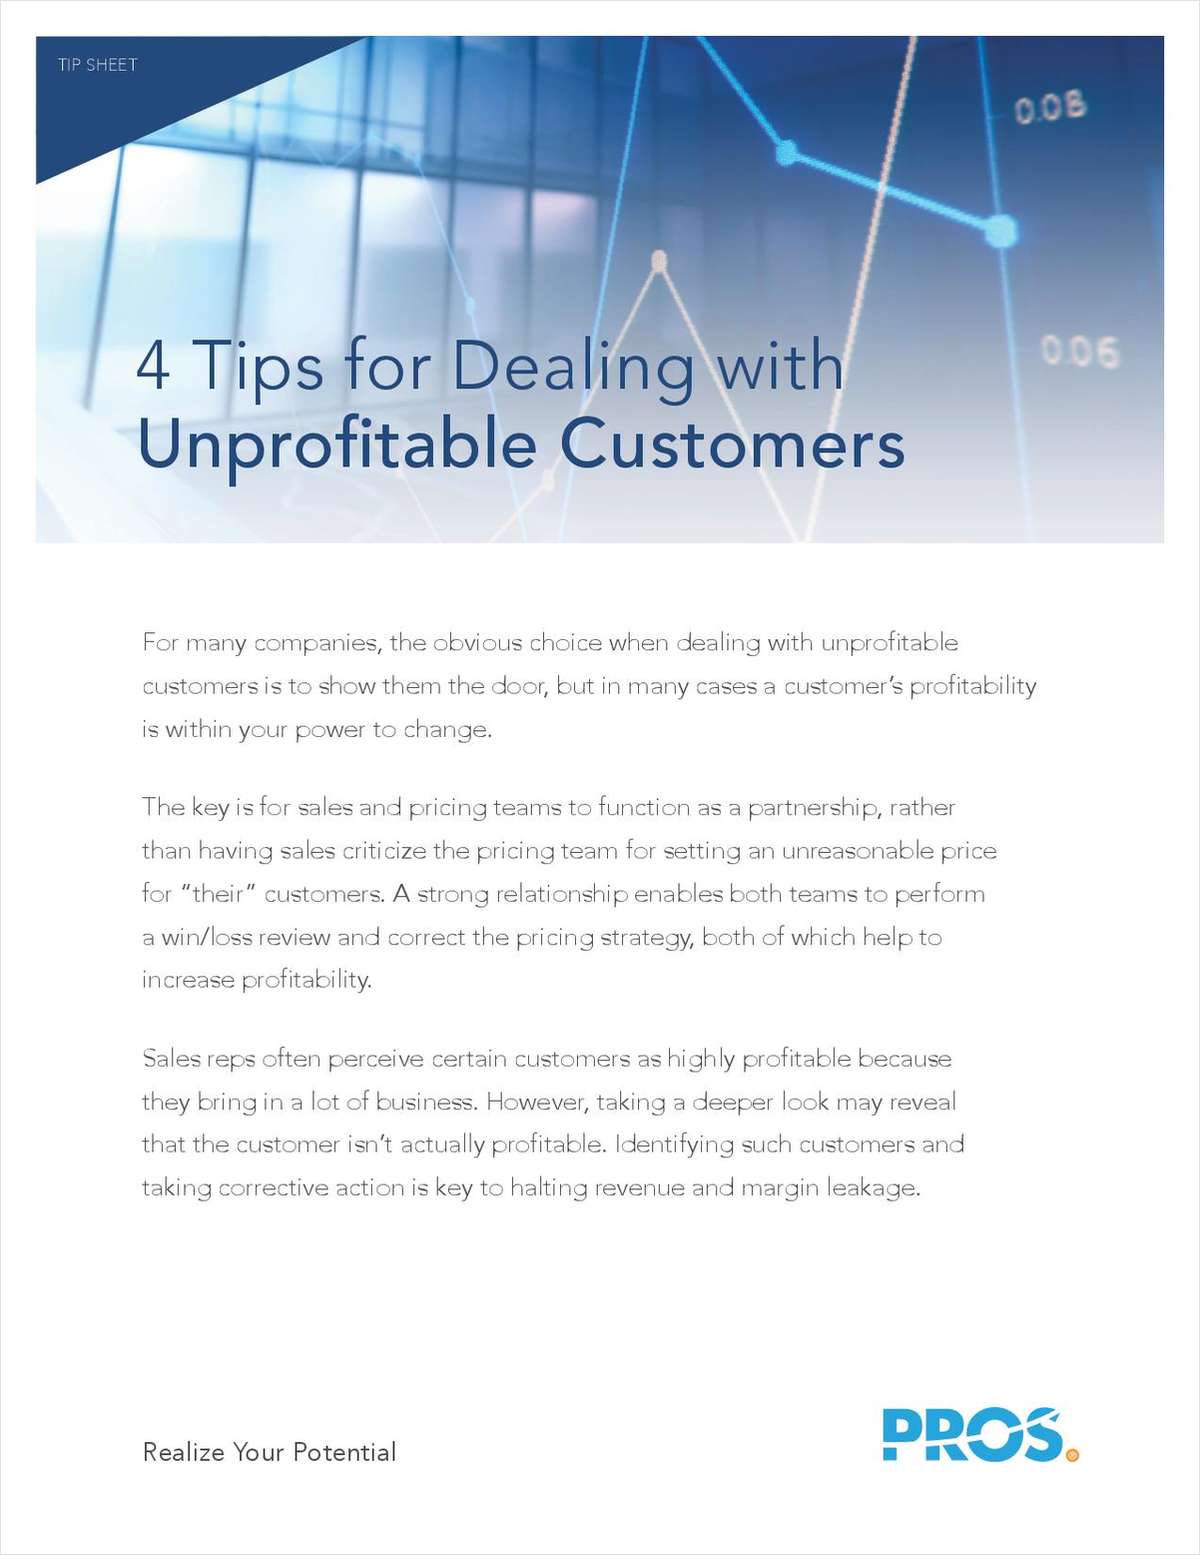 4 Tips for Dealing with Unprofitable Customers